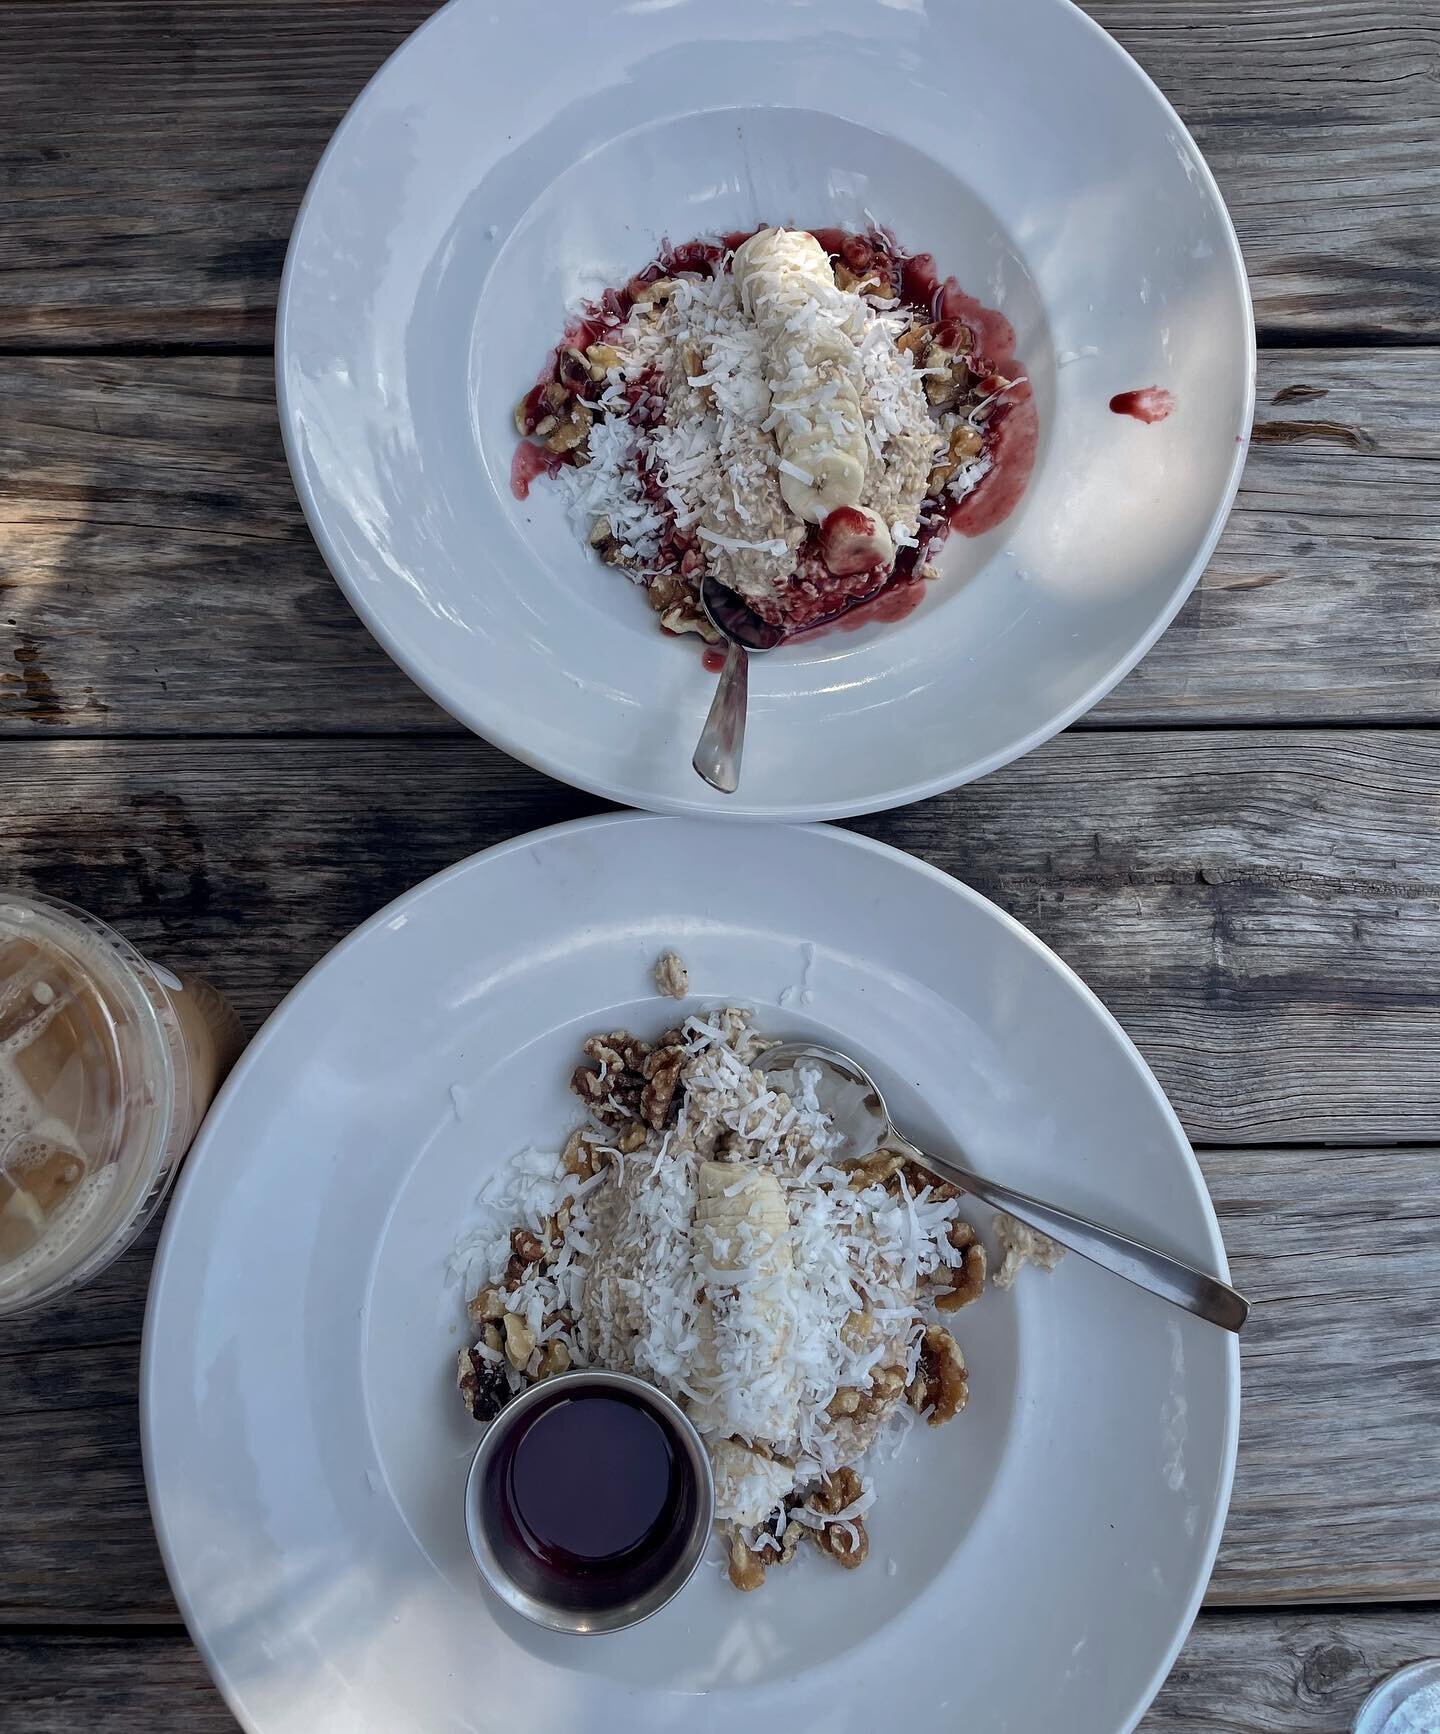 Overnight oats with a side of coffee = best way to start the day 

-oats
-coconut milk
-banana
-coconut
-walnuts
-cherry compote 

#breakfast #overnightoats #healthyfood #frothymonkey #nashville #coconut #healthygirl #foodie #cafe #nashvilleeats #foo